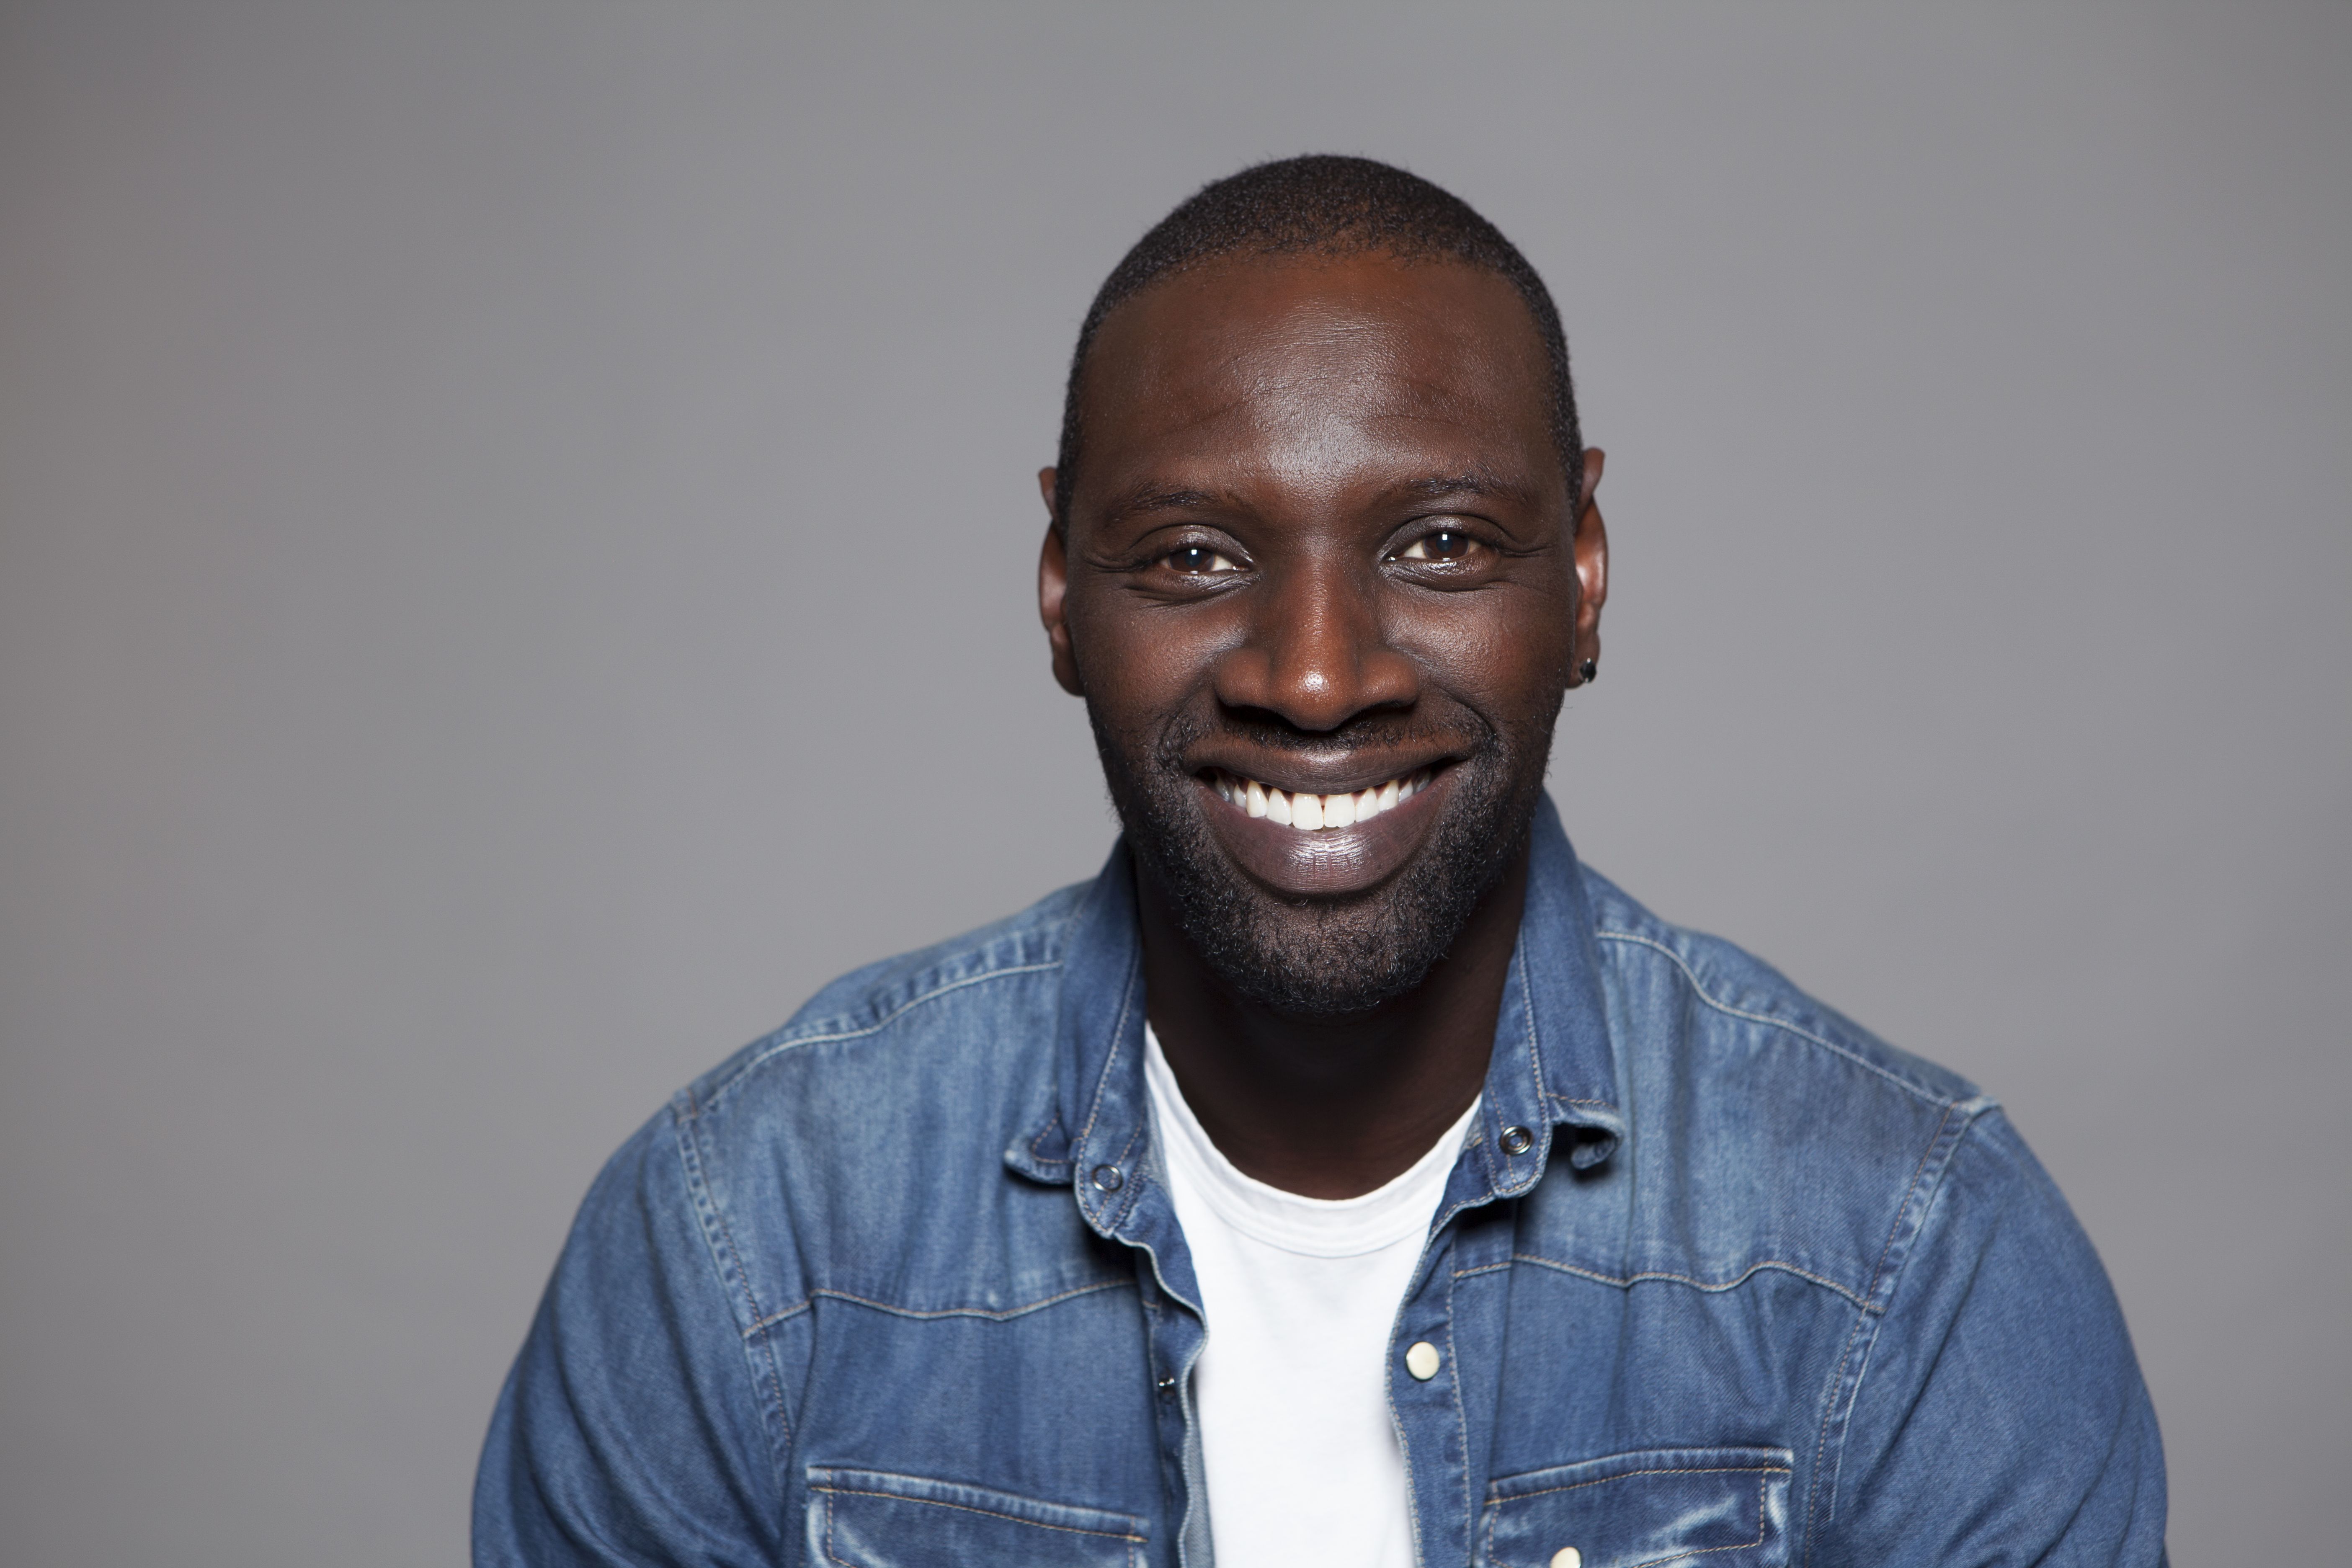 Omar Sy French Actor Smile Wallpaper:5616x3744